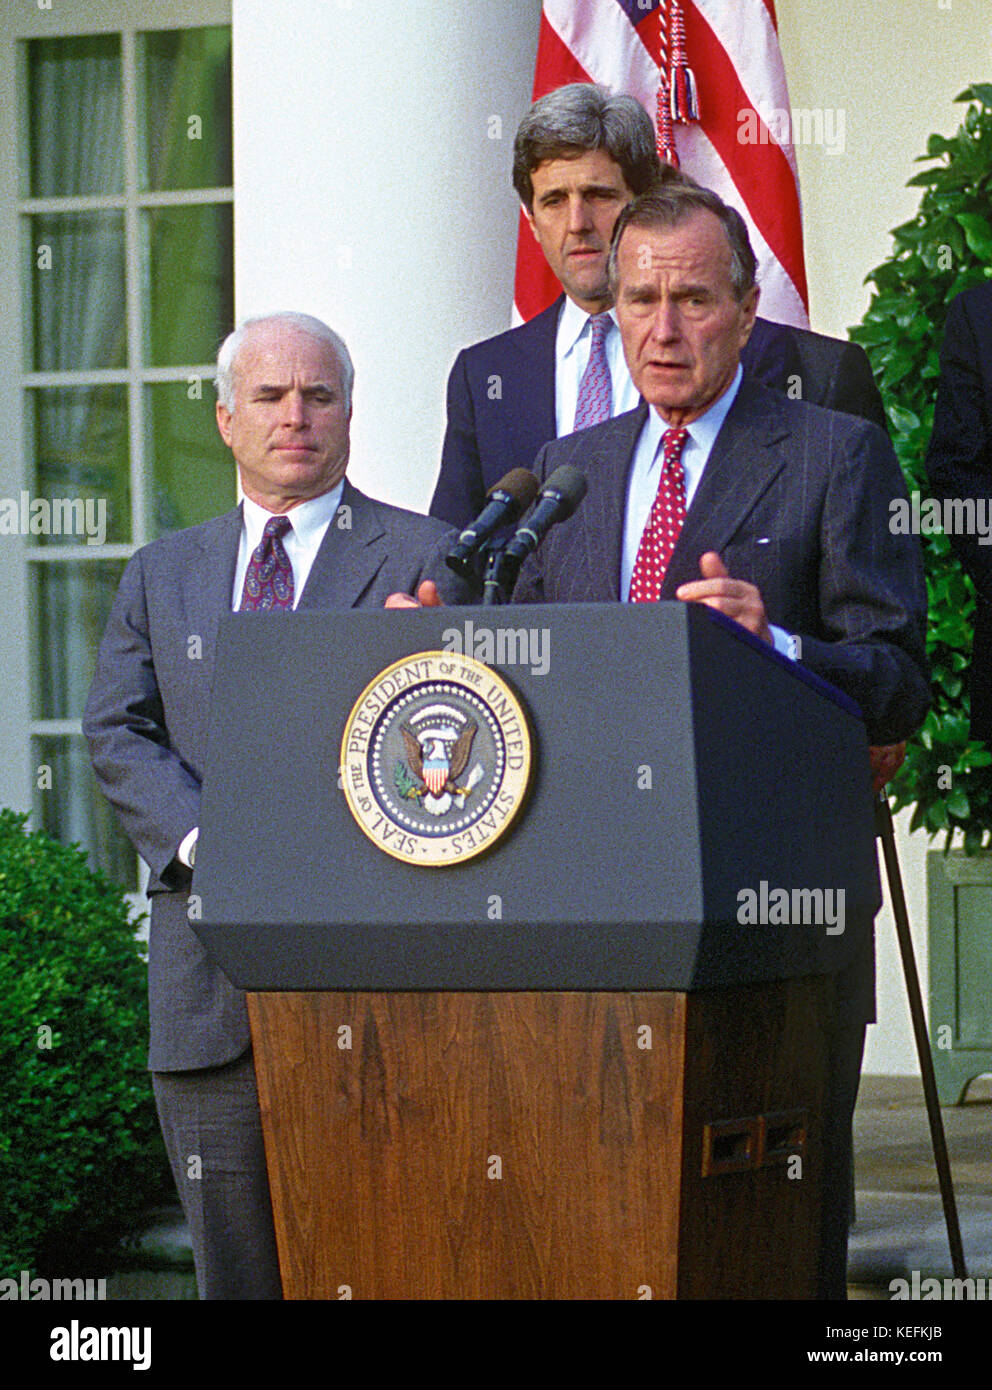 Washington, DC - (FILE) -- United States President George H.W. Bush announces the Government of Vietnam has agreed to make available all information including photographs, artifacts, and military documents on United States prisoners of war (POWs) and those missing in action (MIAs) in the Rose Garden of the White House on Friday, October 23, 1992.  Pictured from left to right: United States Senator John McCain (Republican of Arizona); United States Senator John F. Kerry (Democrat of Massachusetts); and President Bush..Credit: Ron Sachs / CNP /MediaPunch Stock Photo